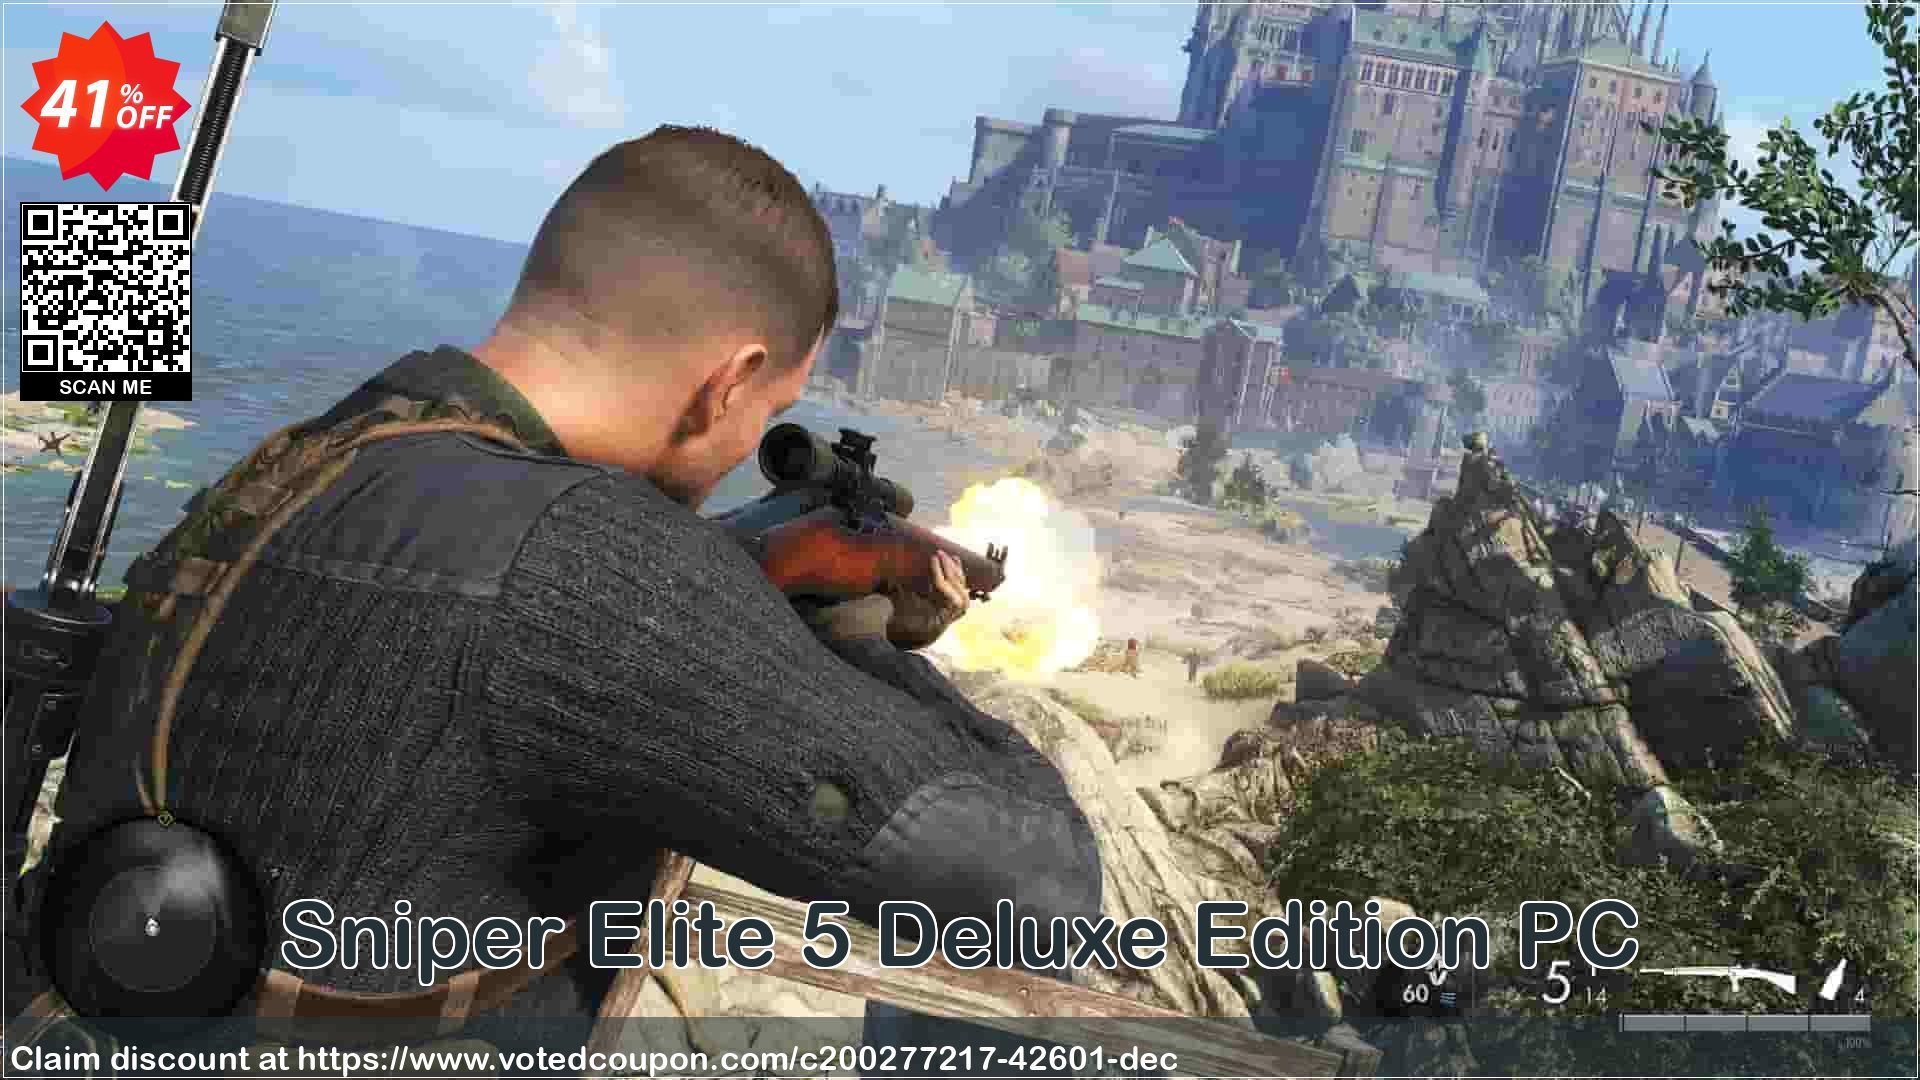 Sniper Elite 5 Deluxe Edition PC Coupon Code May 2024, 41% OFF - VotedCoupon